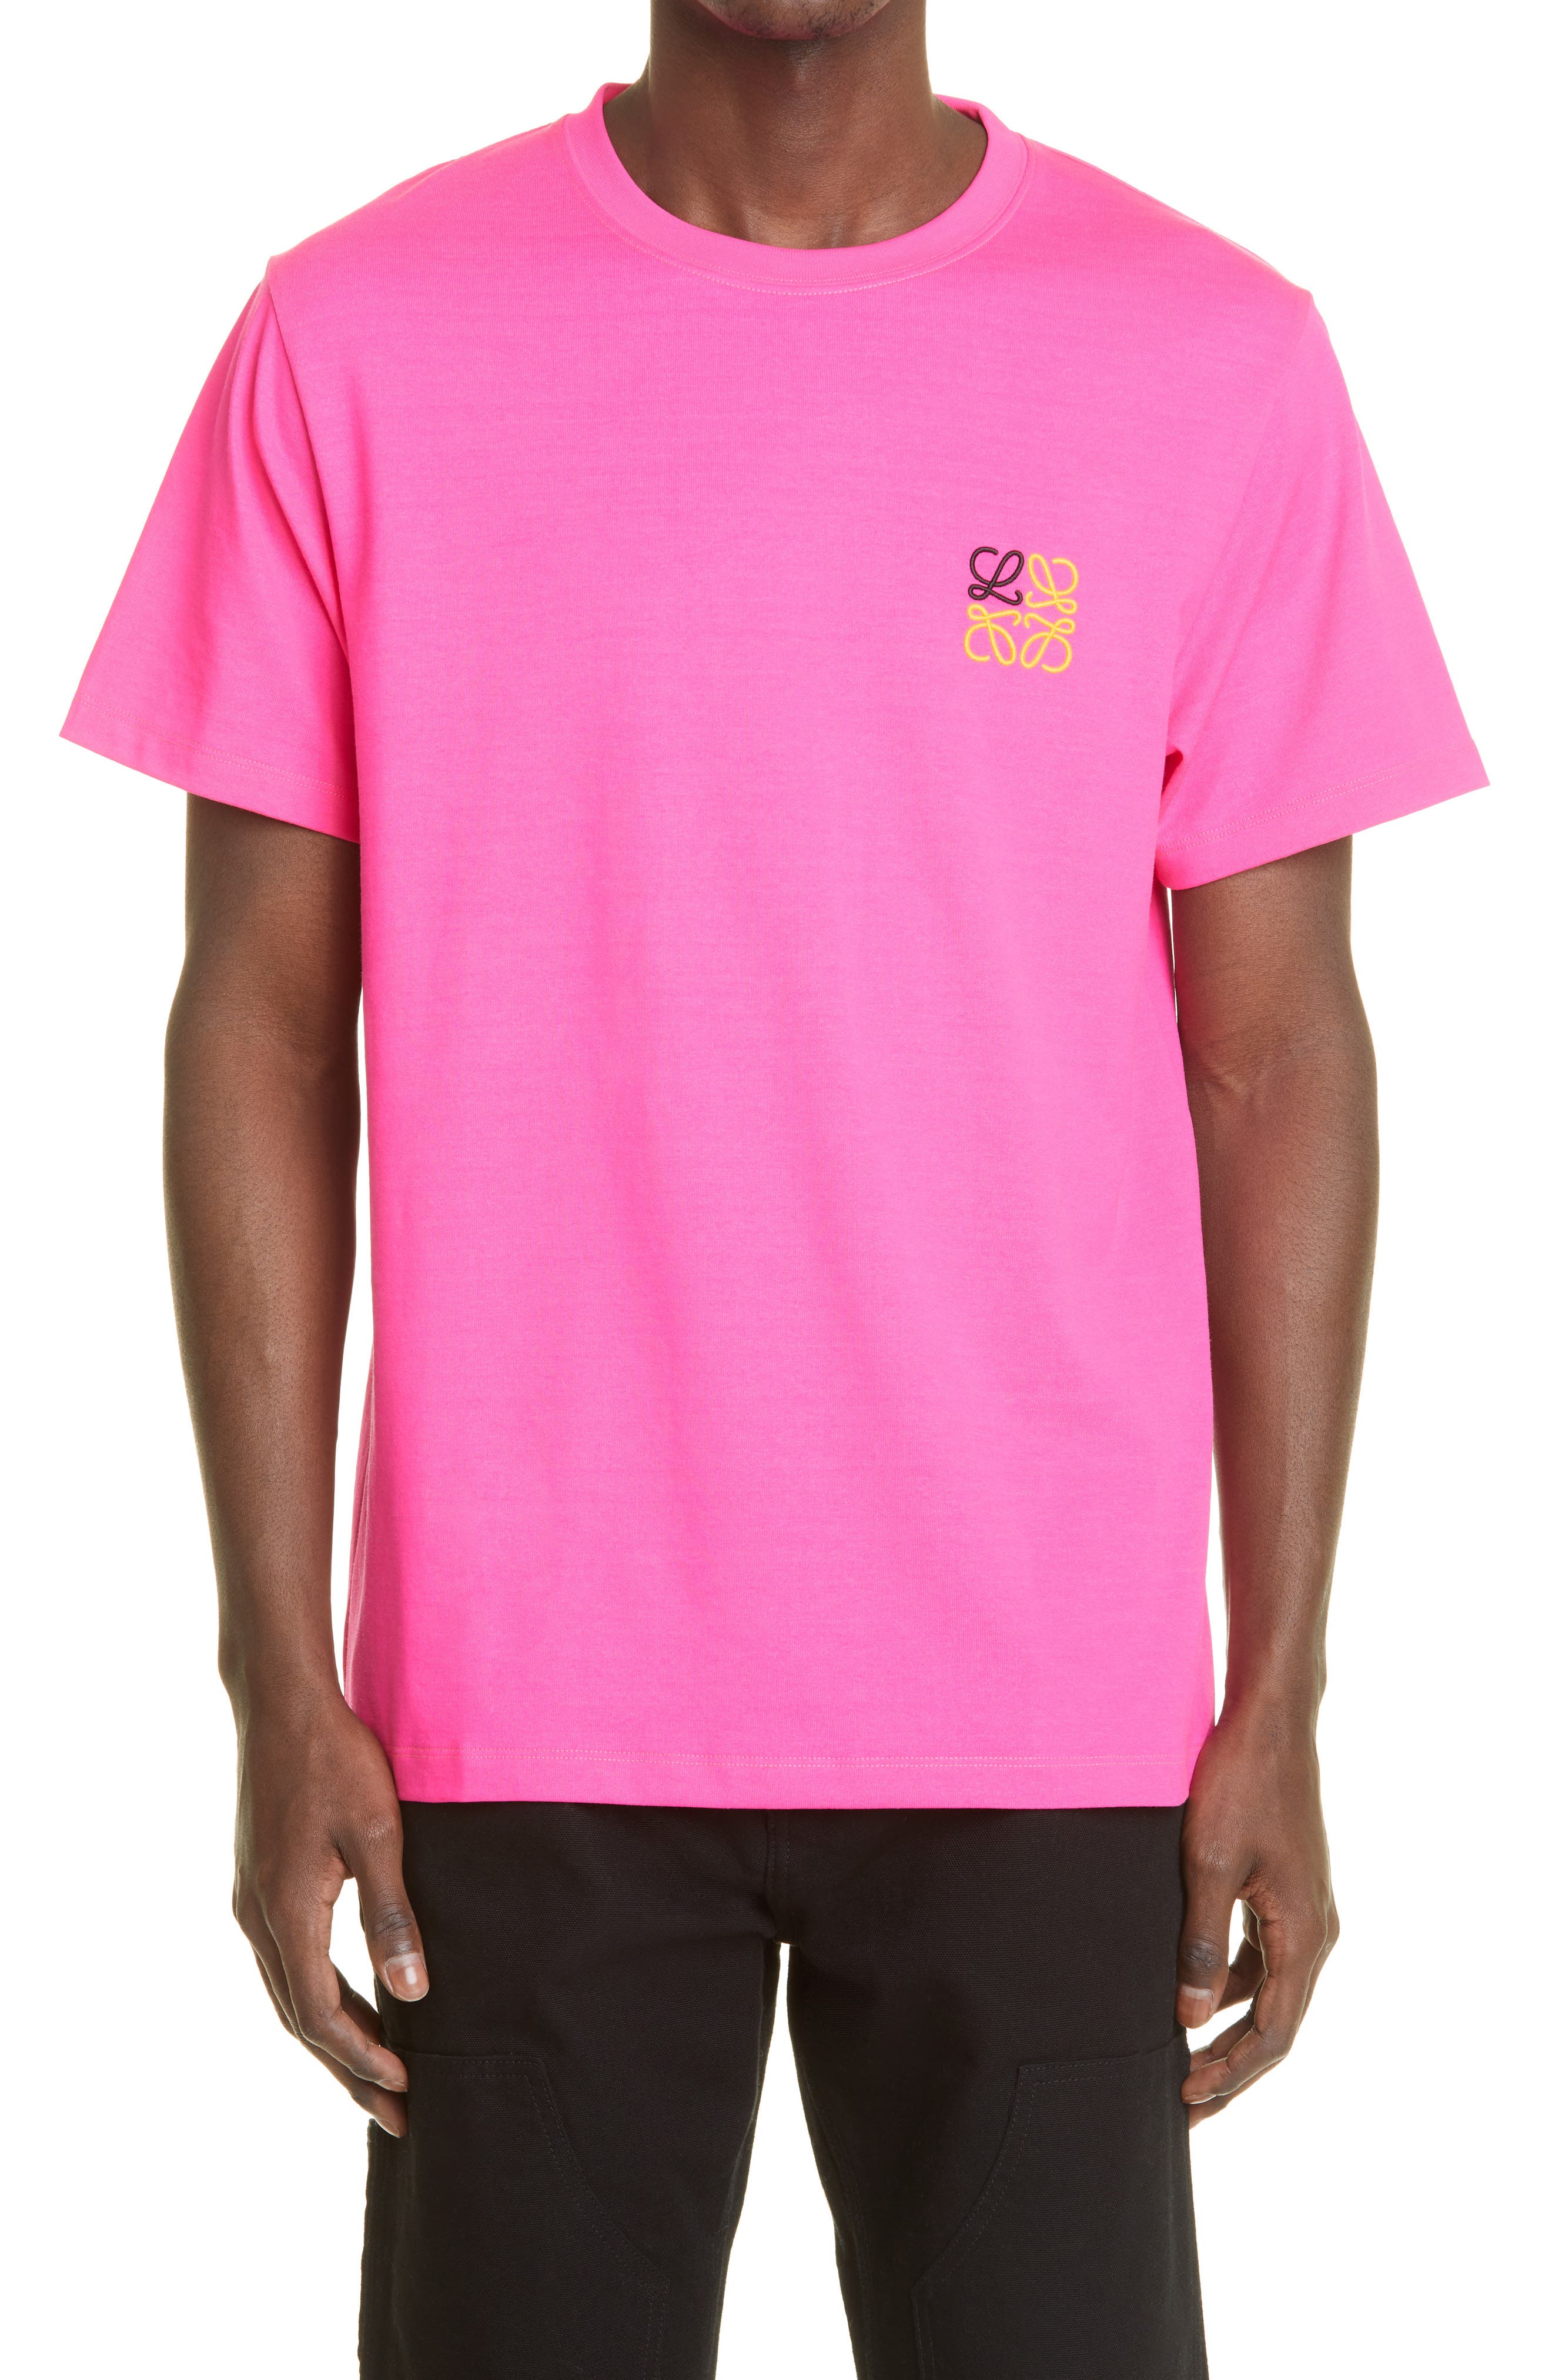 Loewe Men's Anagram Logo Embroidered Cotton Blend T-Shirt in Fluorescent Pink at Nordstrom, Size X-Large